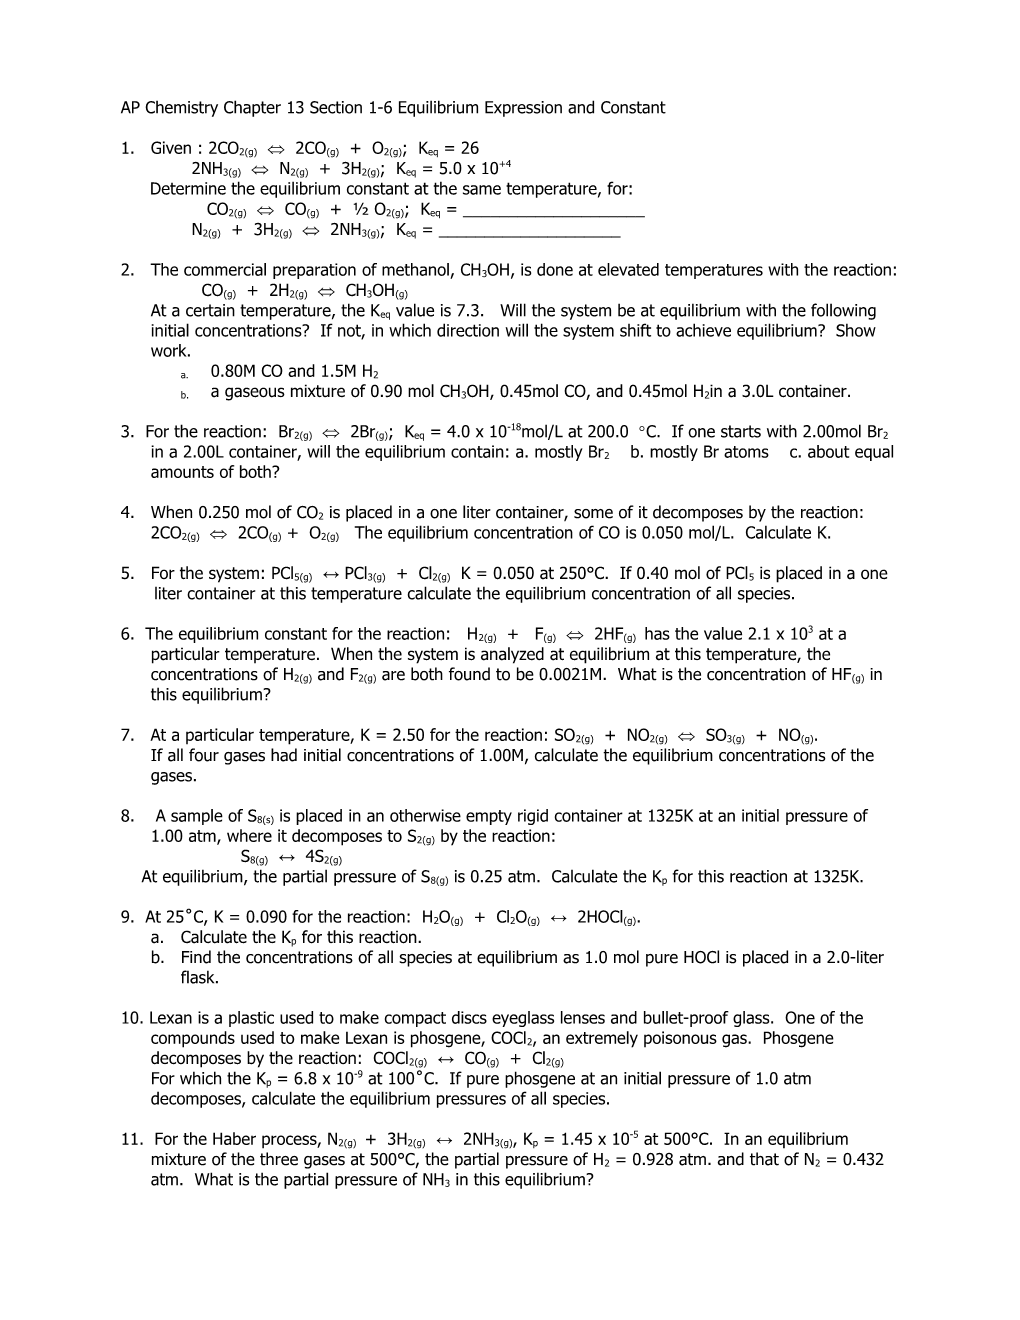 AP Chemistry Chapter 13 Section 1-6 Equilibrium Expression and Constant